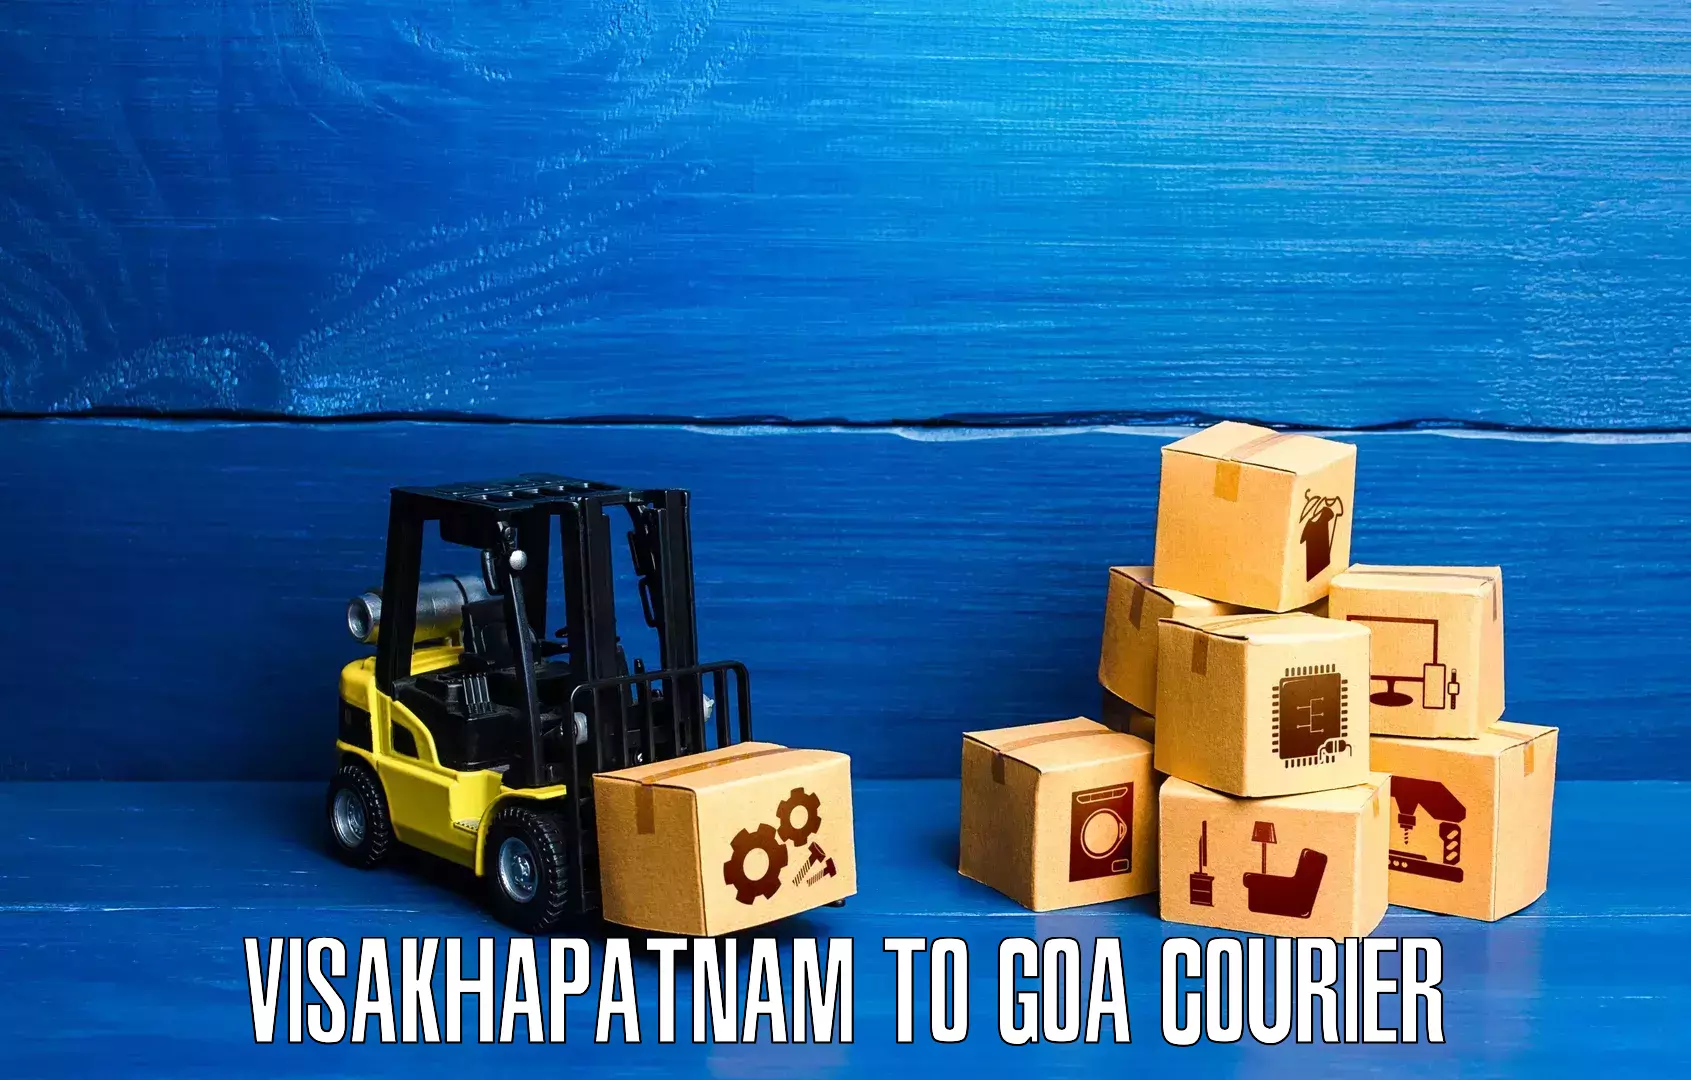 Local delivery service Visakhapatnam to Goa